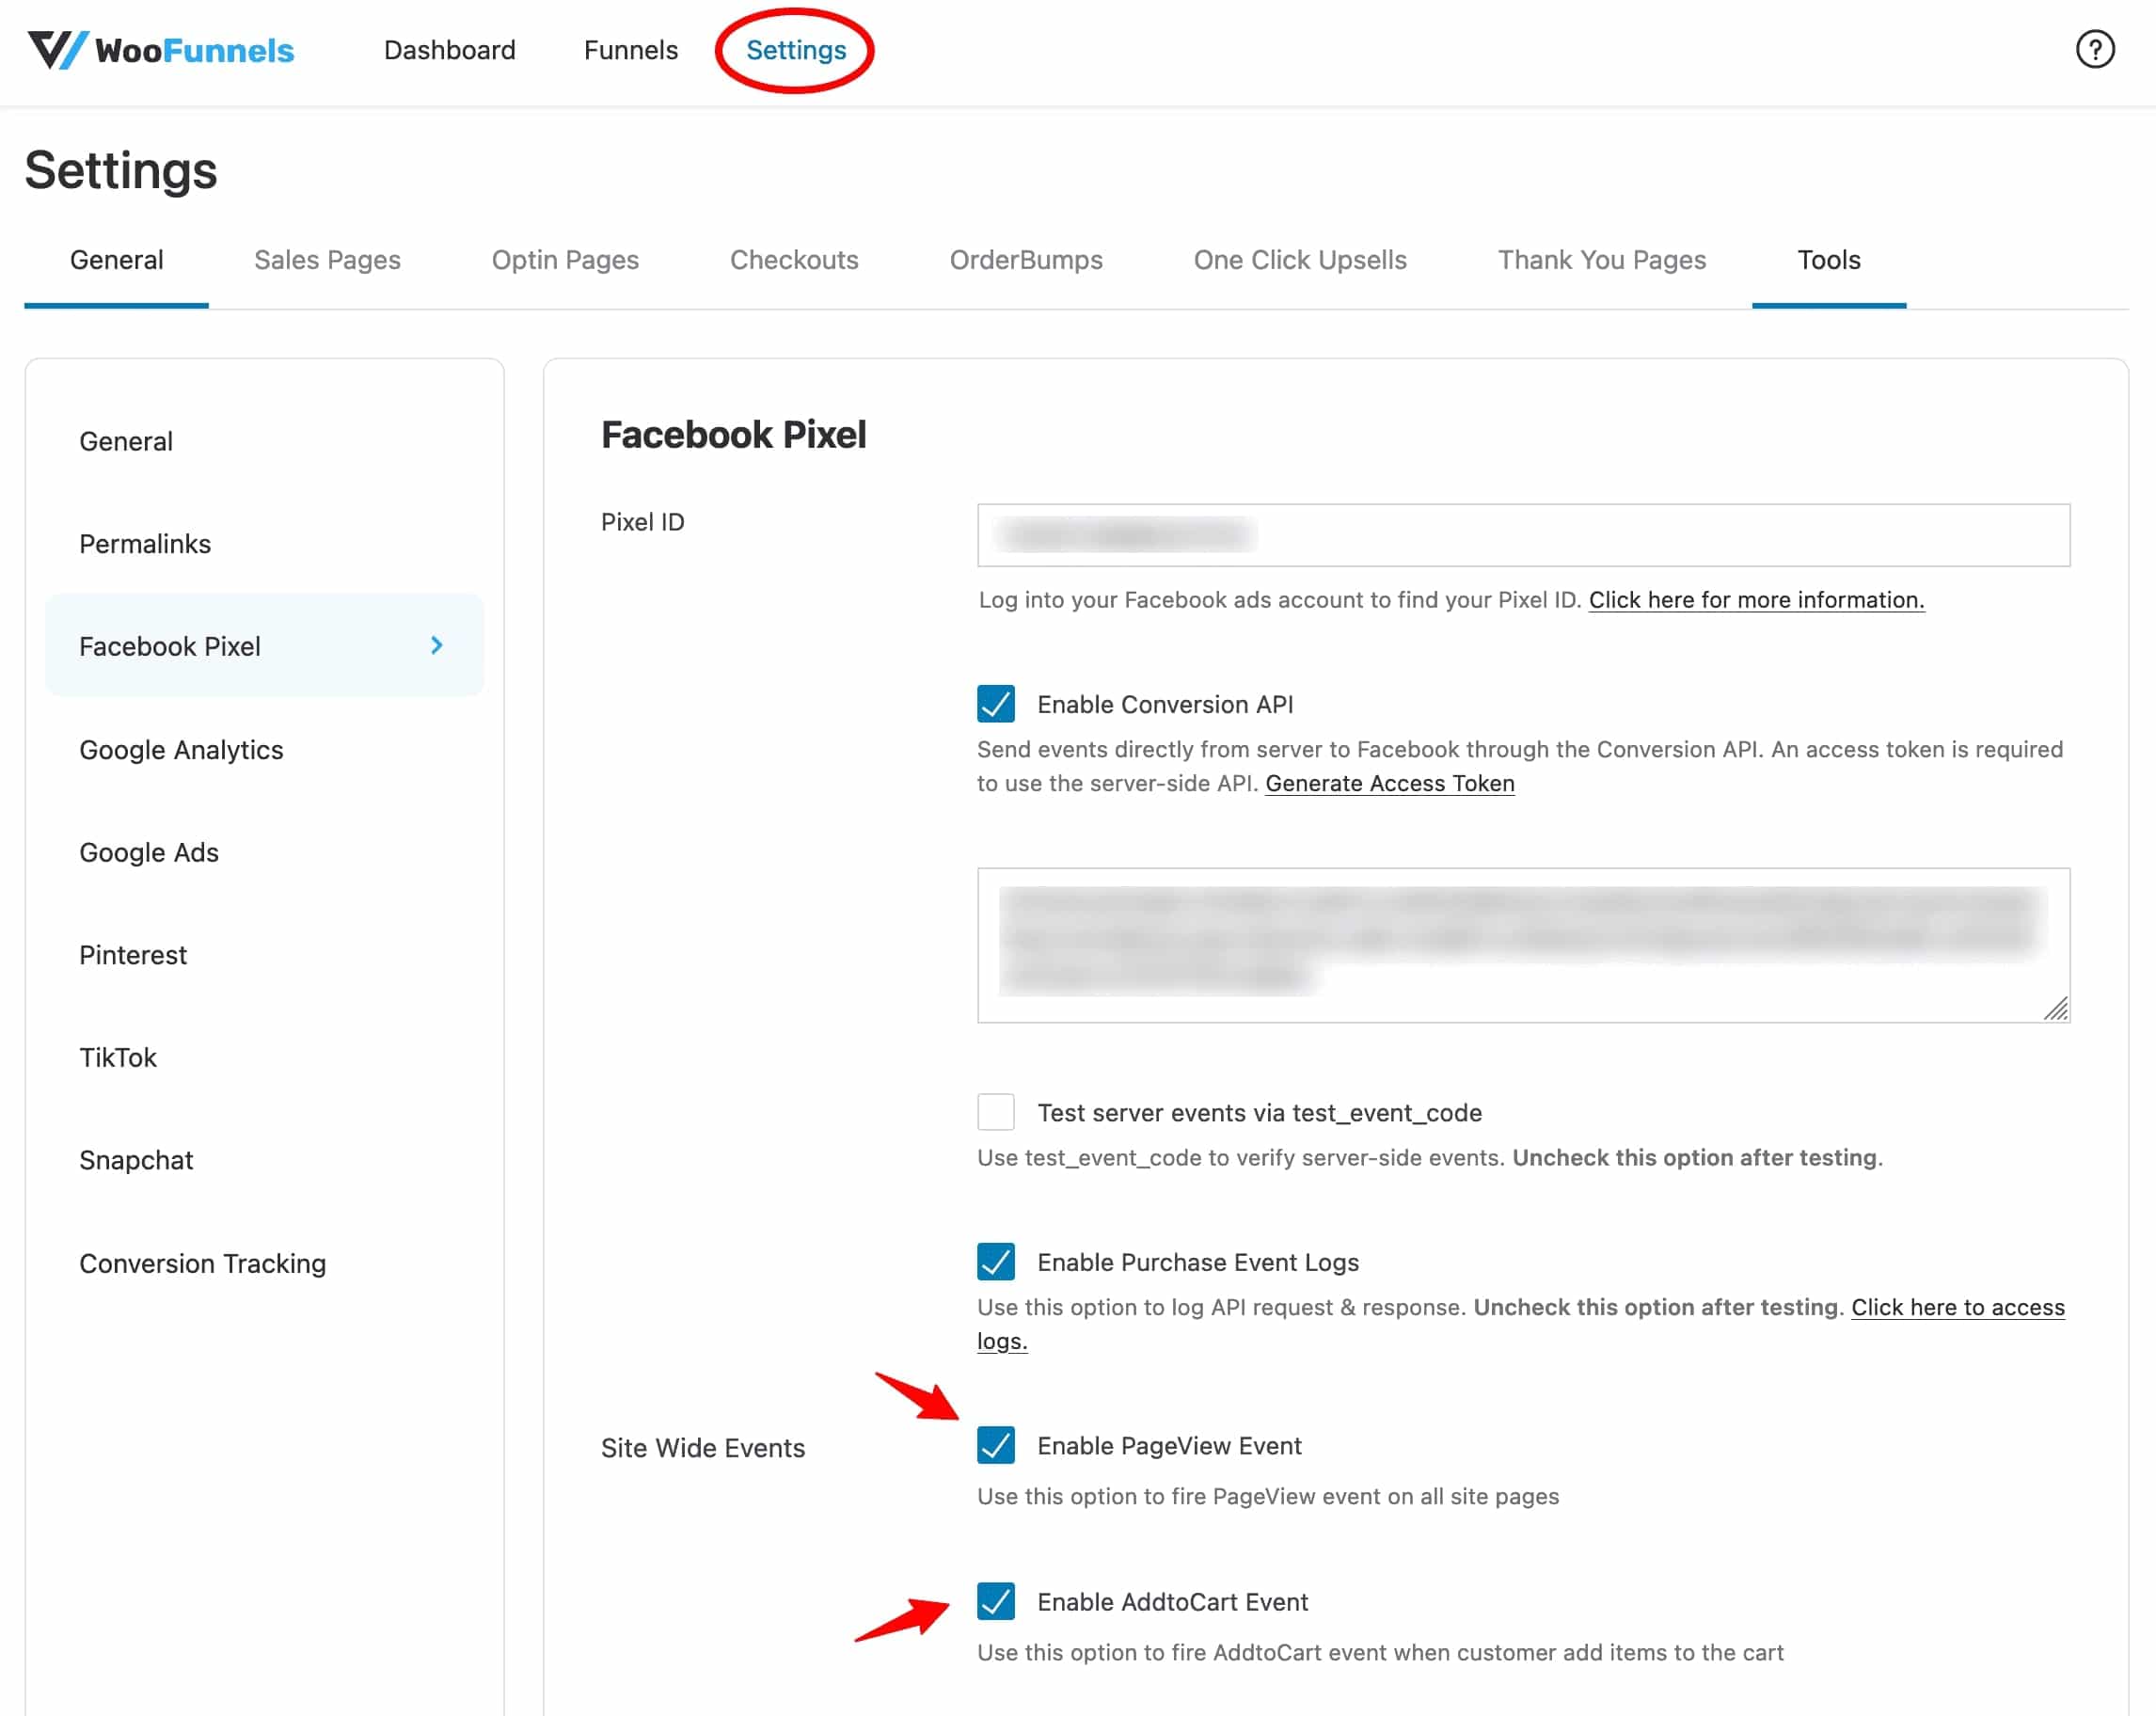 Enable Site Wide events in the Funnel Builder 2.0